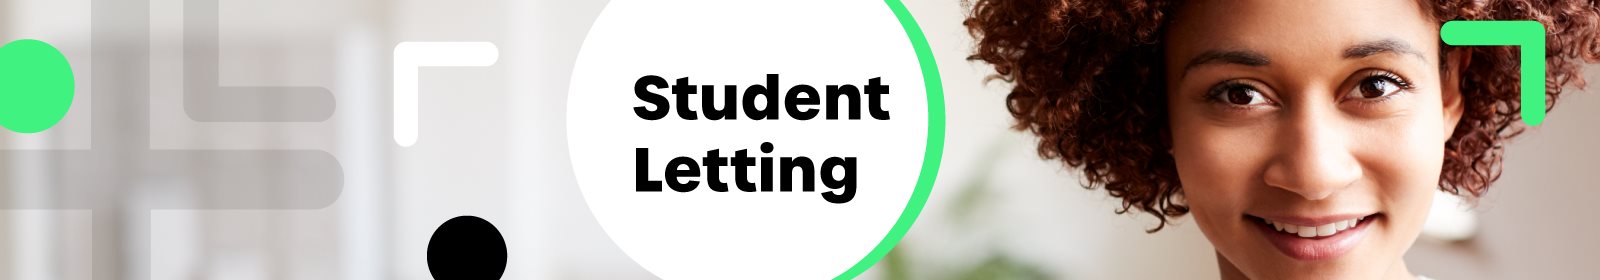 Student letting guide: An investor guide to student letting